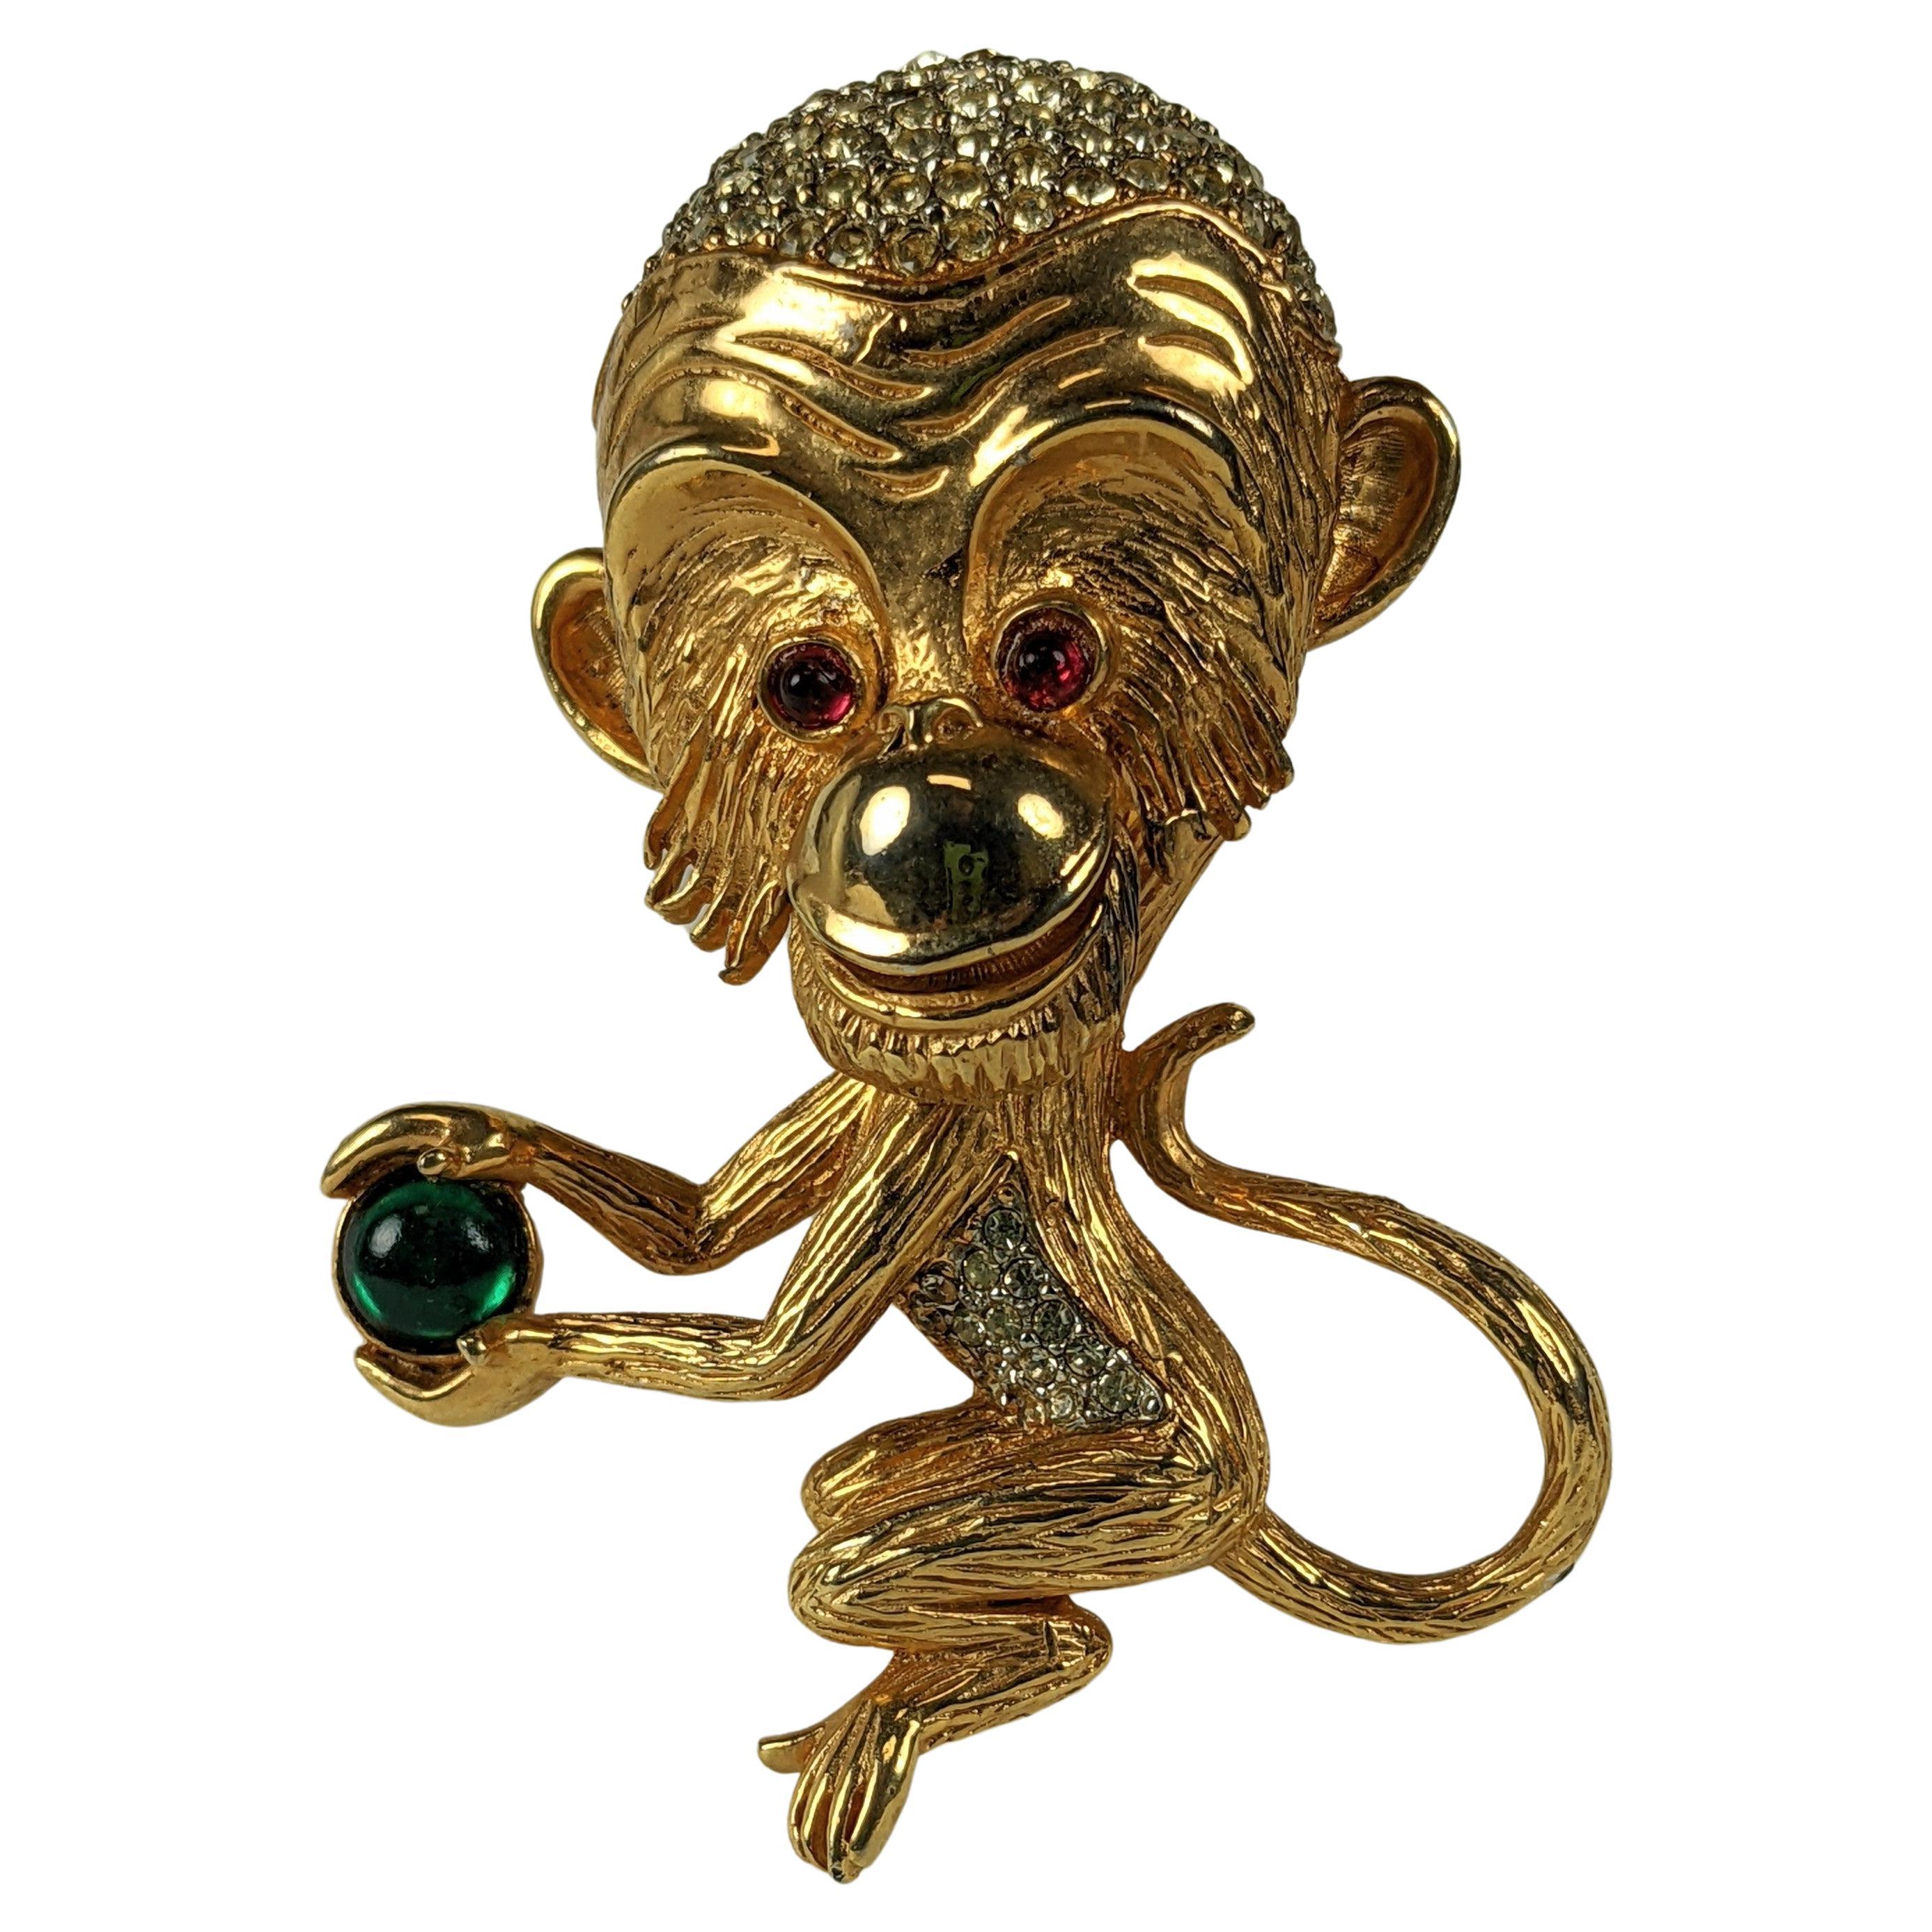 Adorable novelty Pauline Rader Chattering Monkey Brooch from the 1960's. The lower jaw is set with a trembling spring so the money's mouth is always moving. Unusual and charming. 3